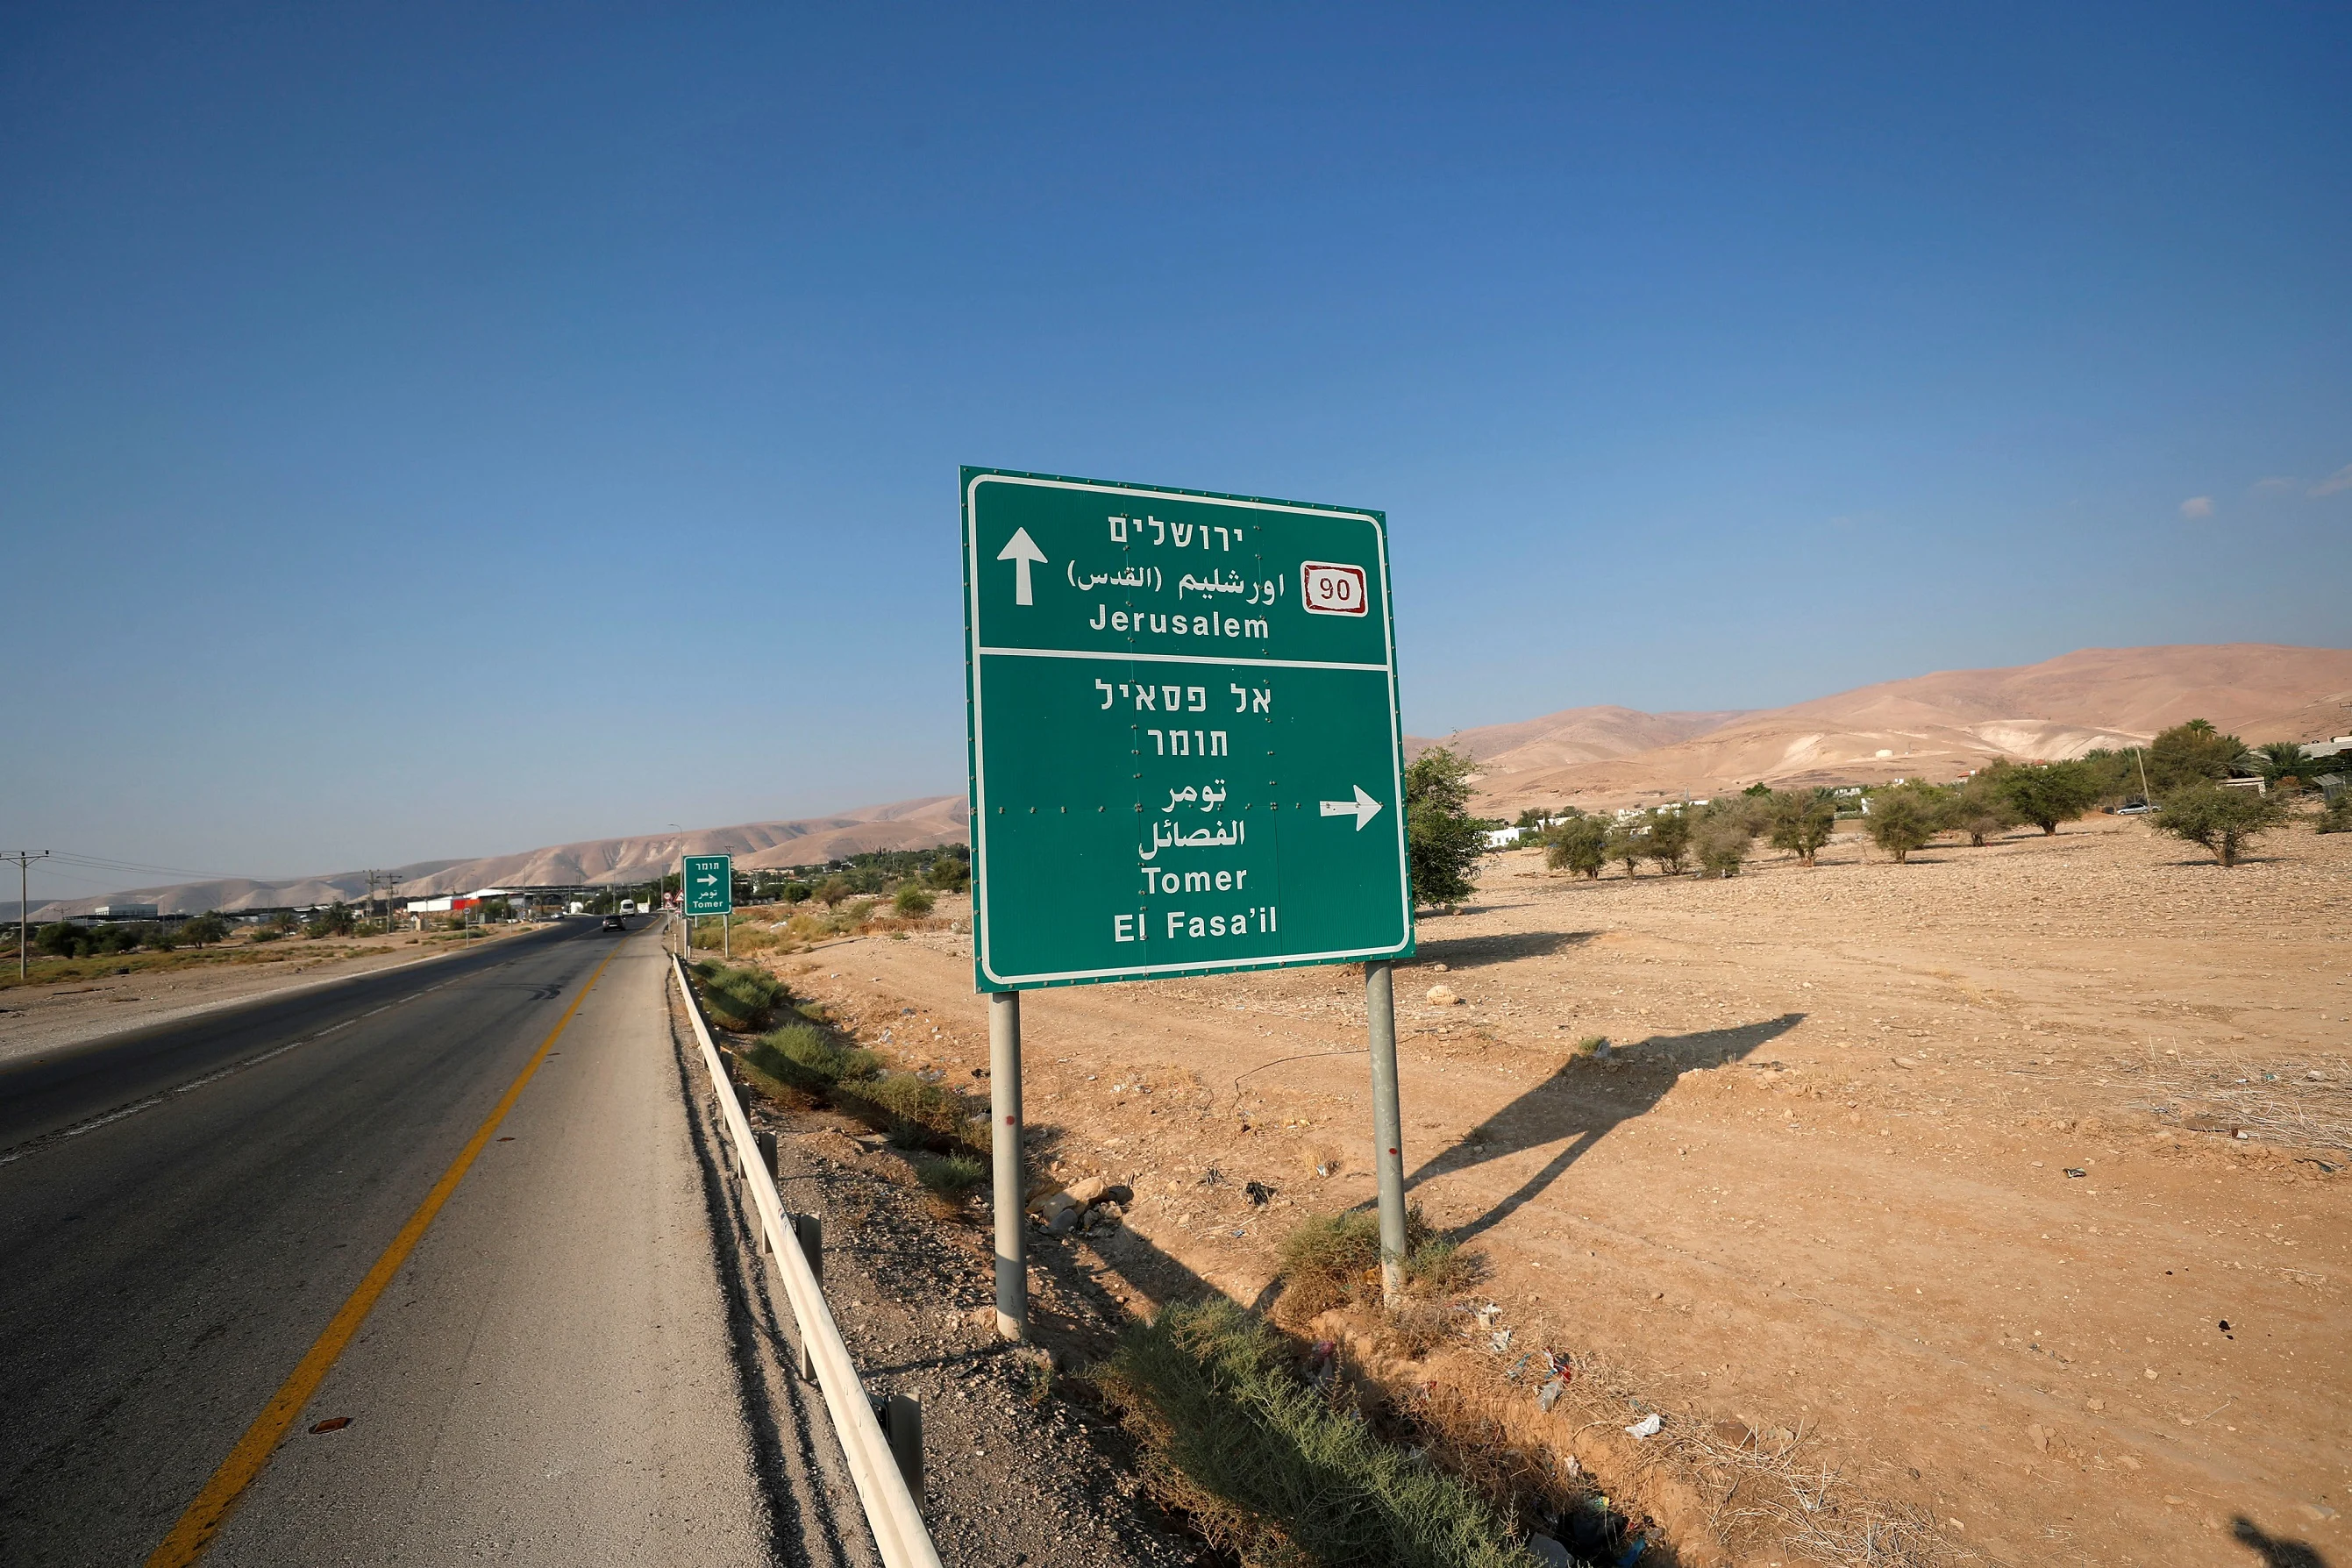 Road Sign Directing To Jerusalem Is Seen In Jordan Valley In The Israeli Occupied West Bank